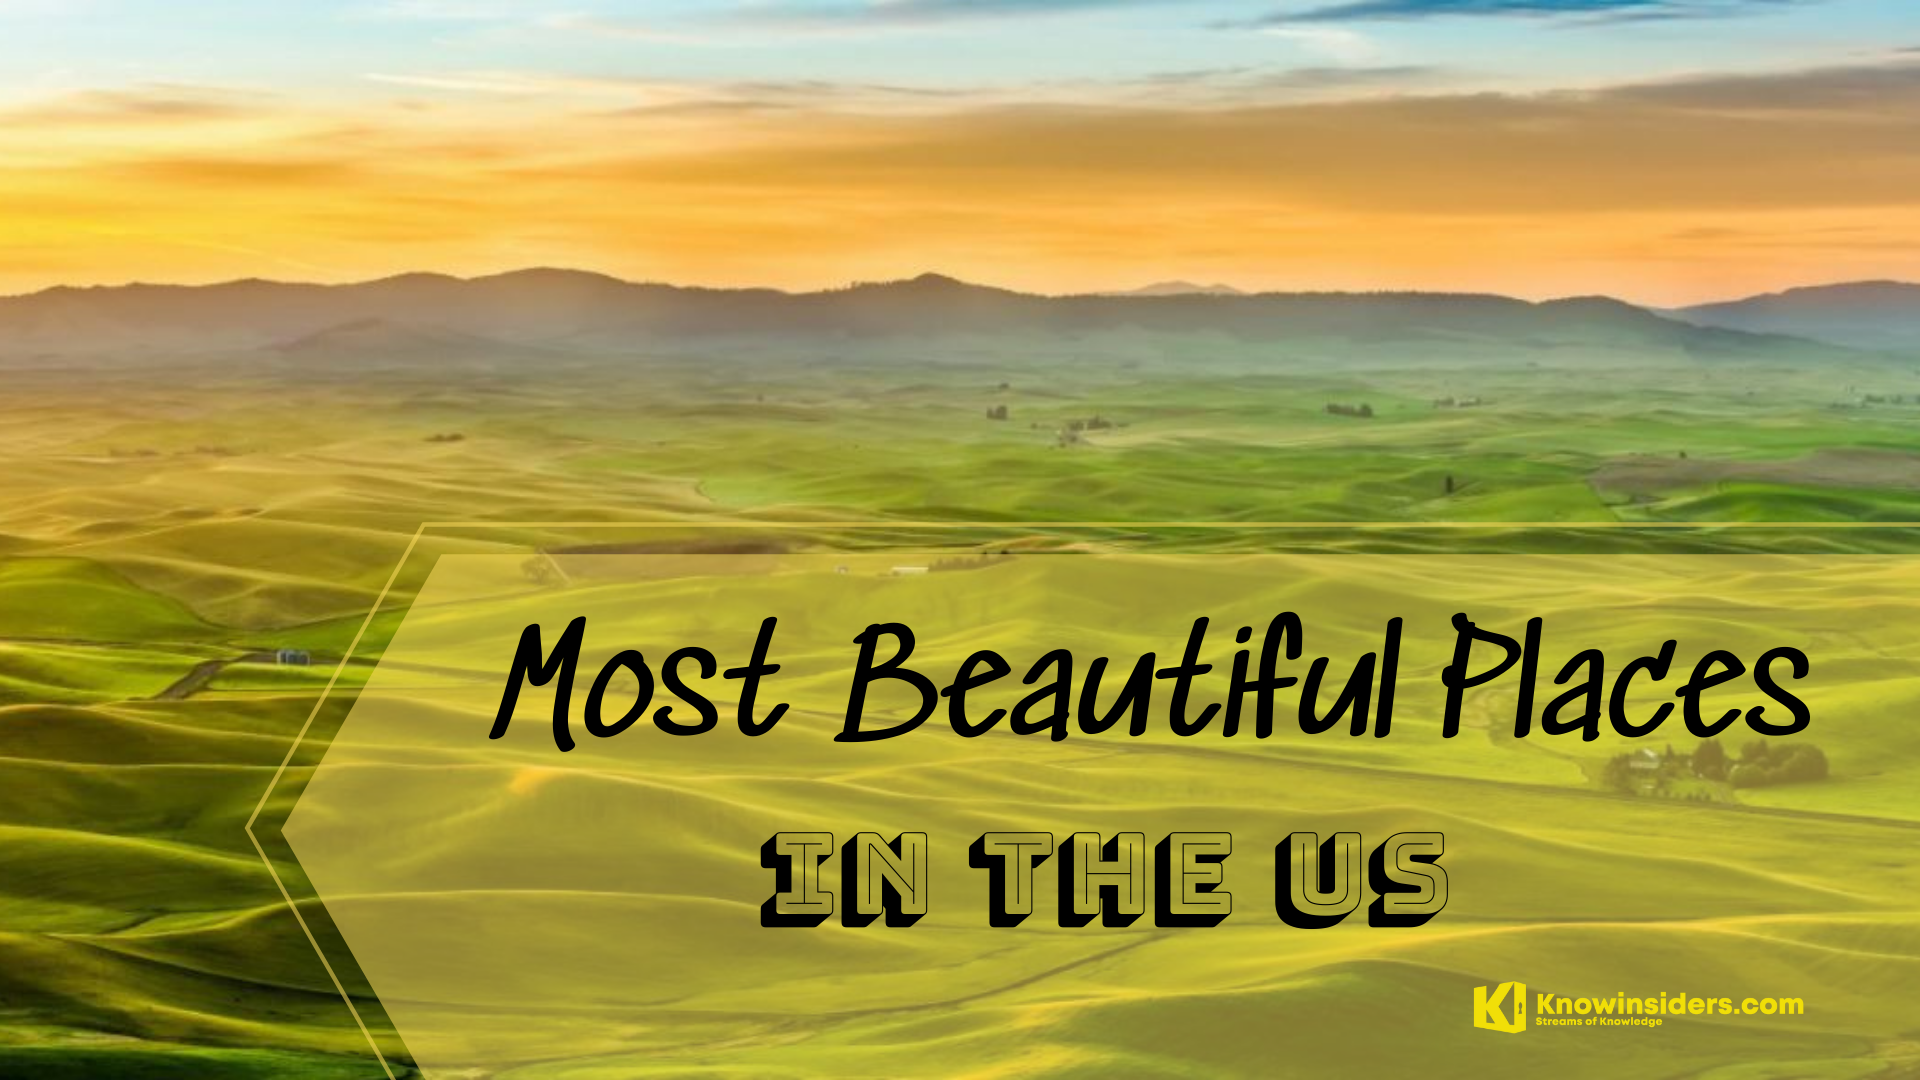 Top 15 Most Beautiful & Breathtaking Places In The US